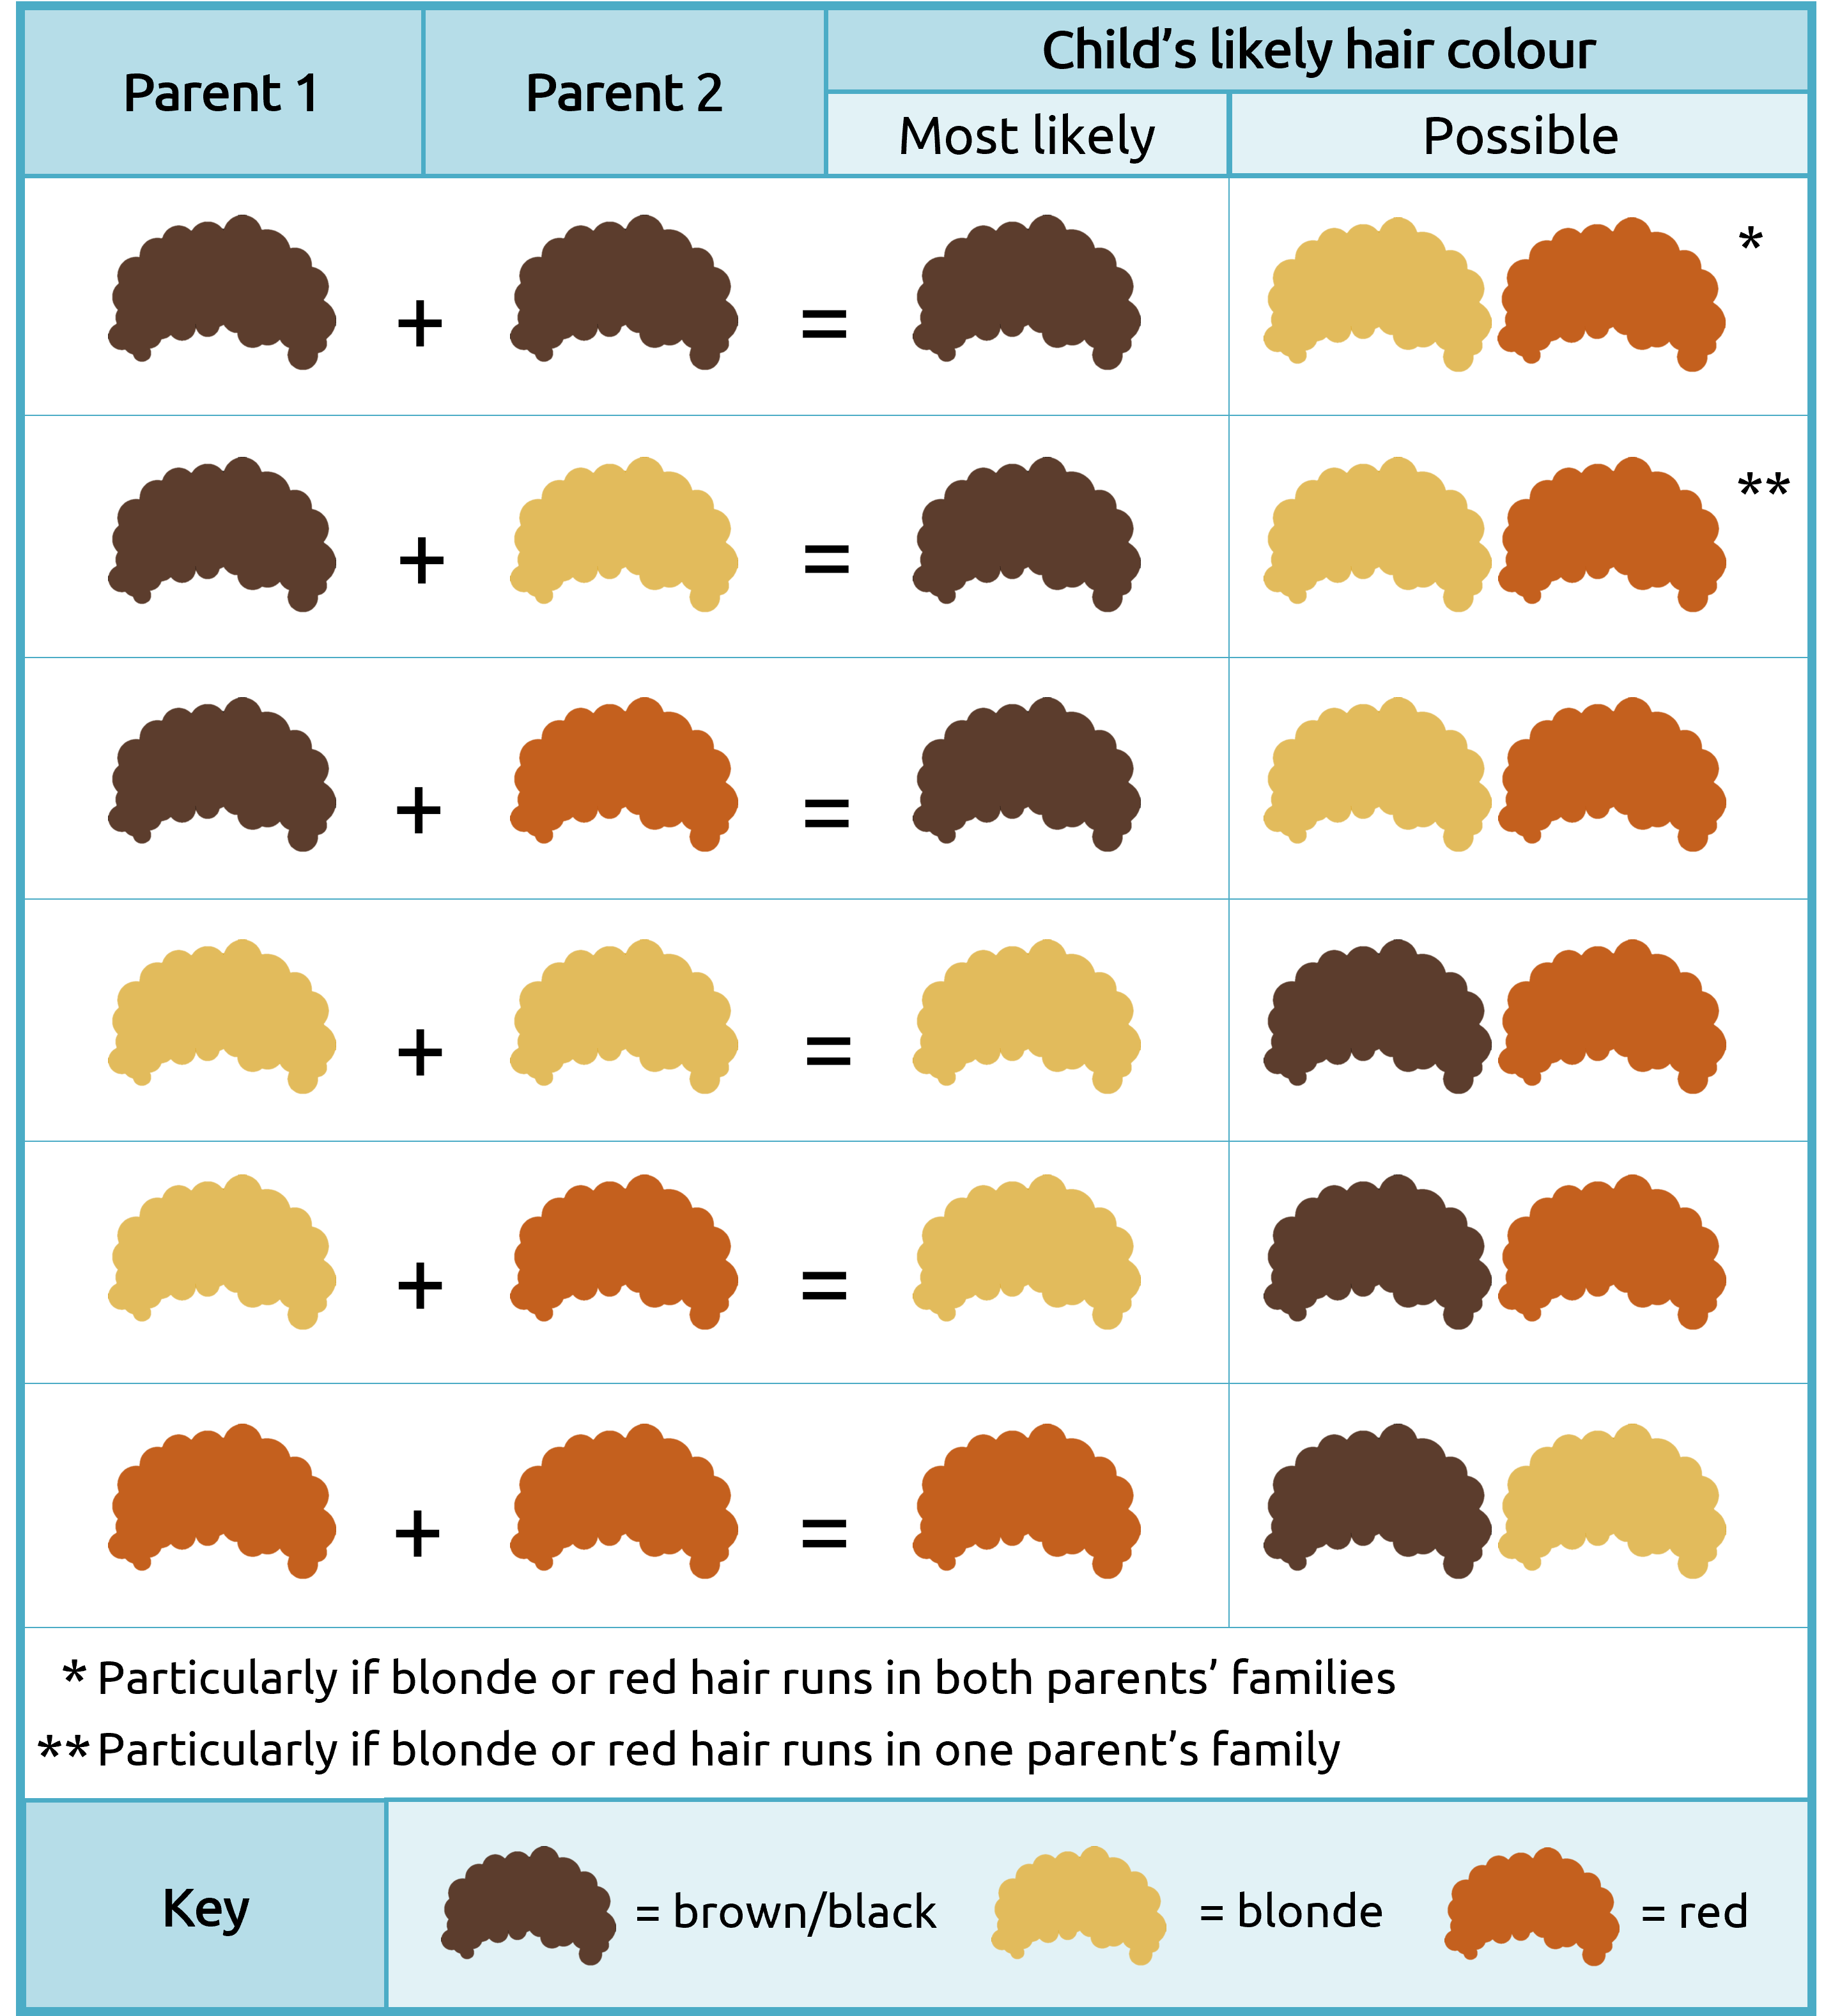 https://www.familyeducation.com/sites/default/files/inline-images/hair_chart_updated.png